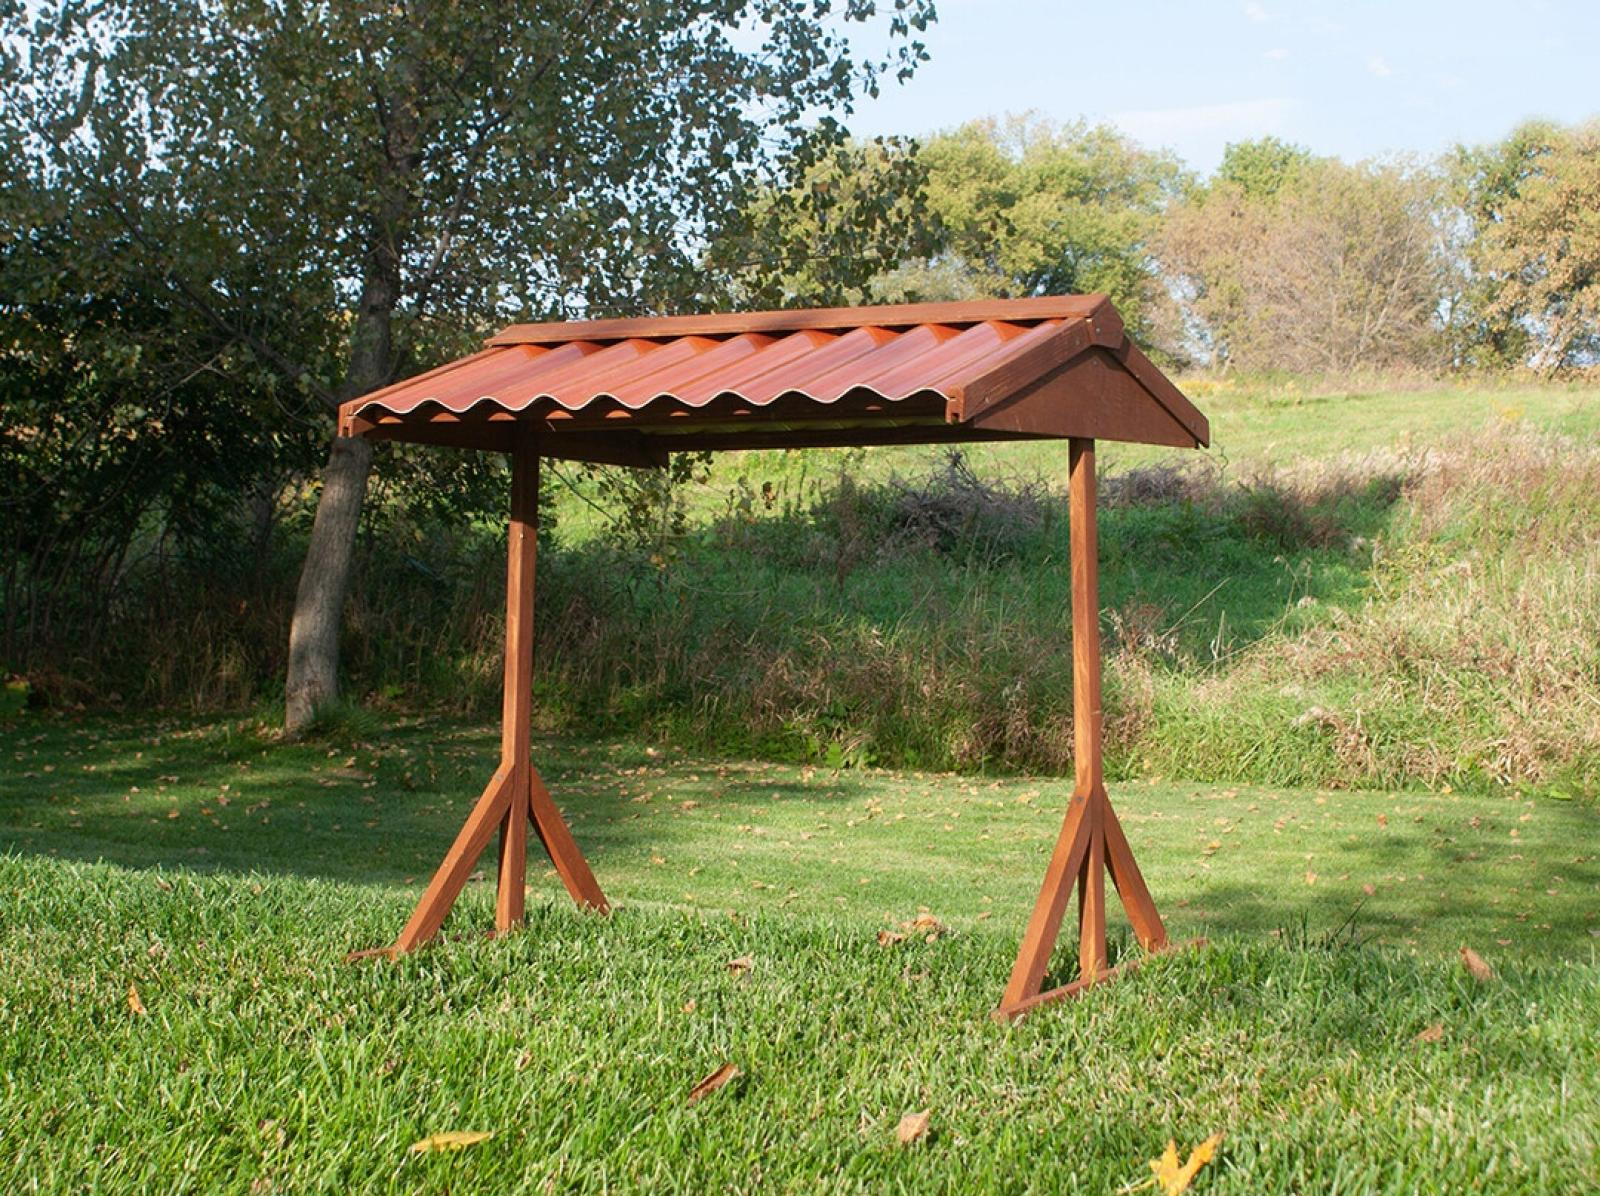 Coops & Feathers Large Wood Food & Water Shelter